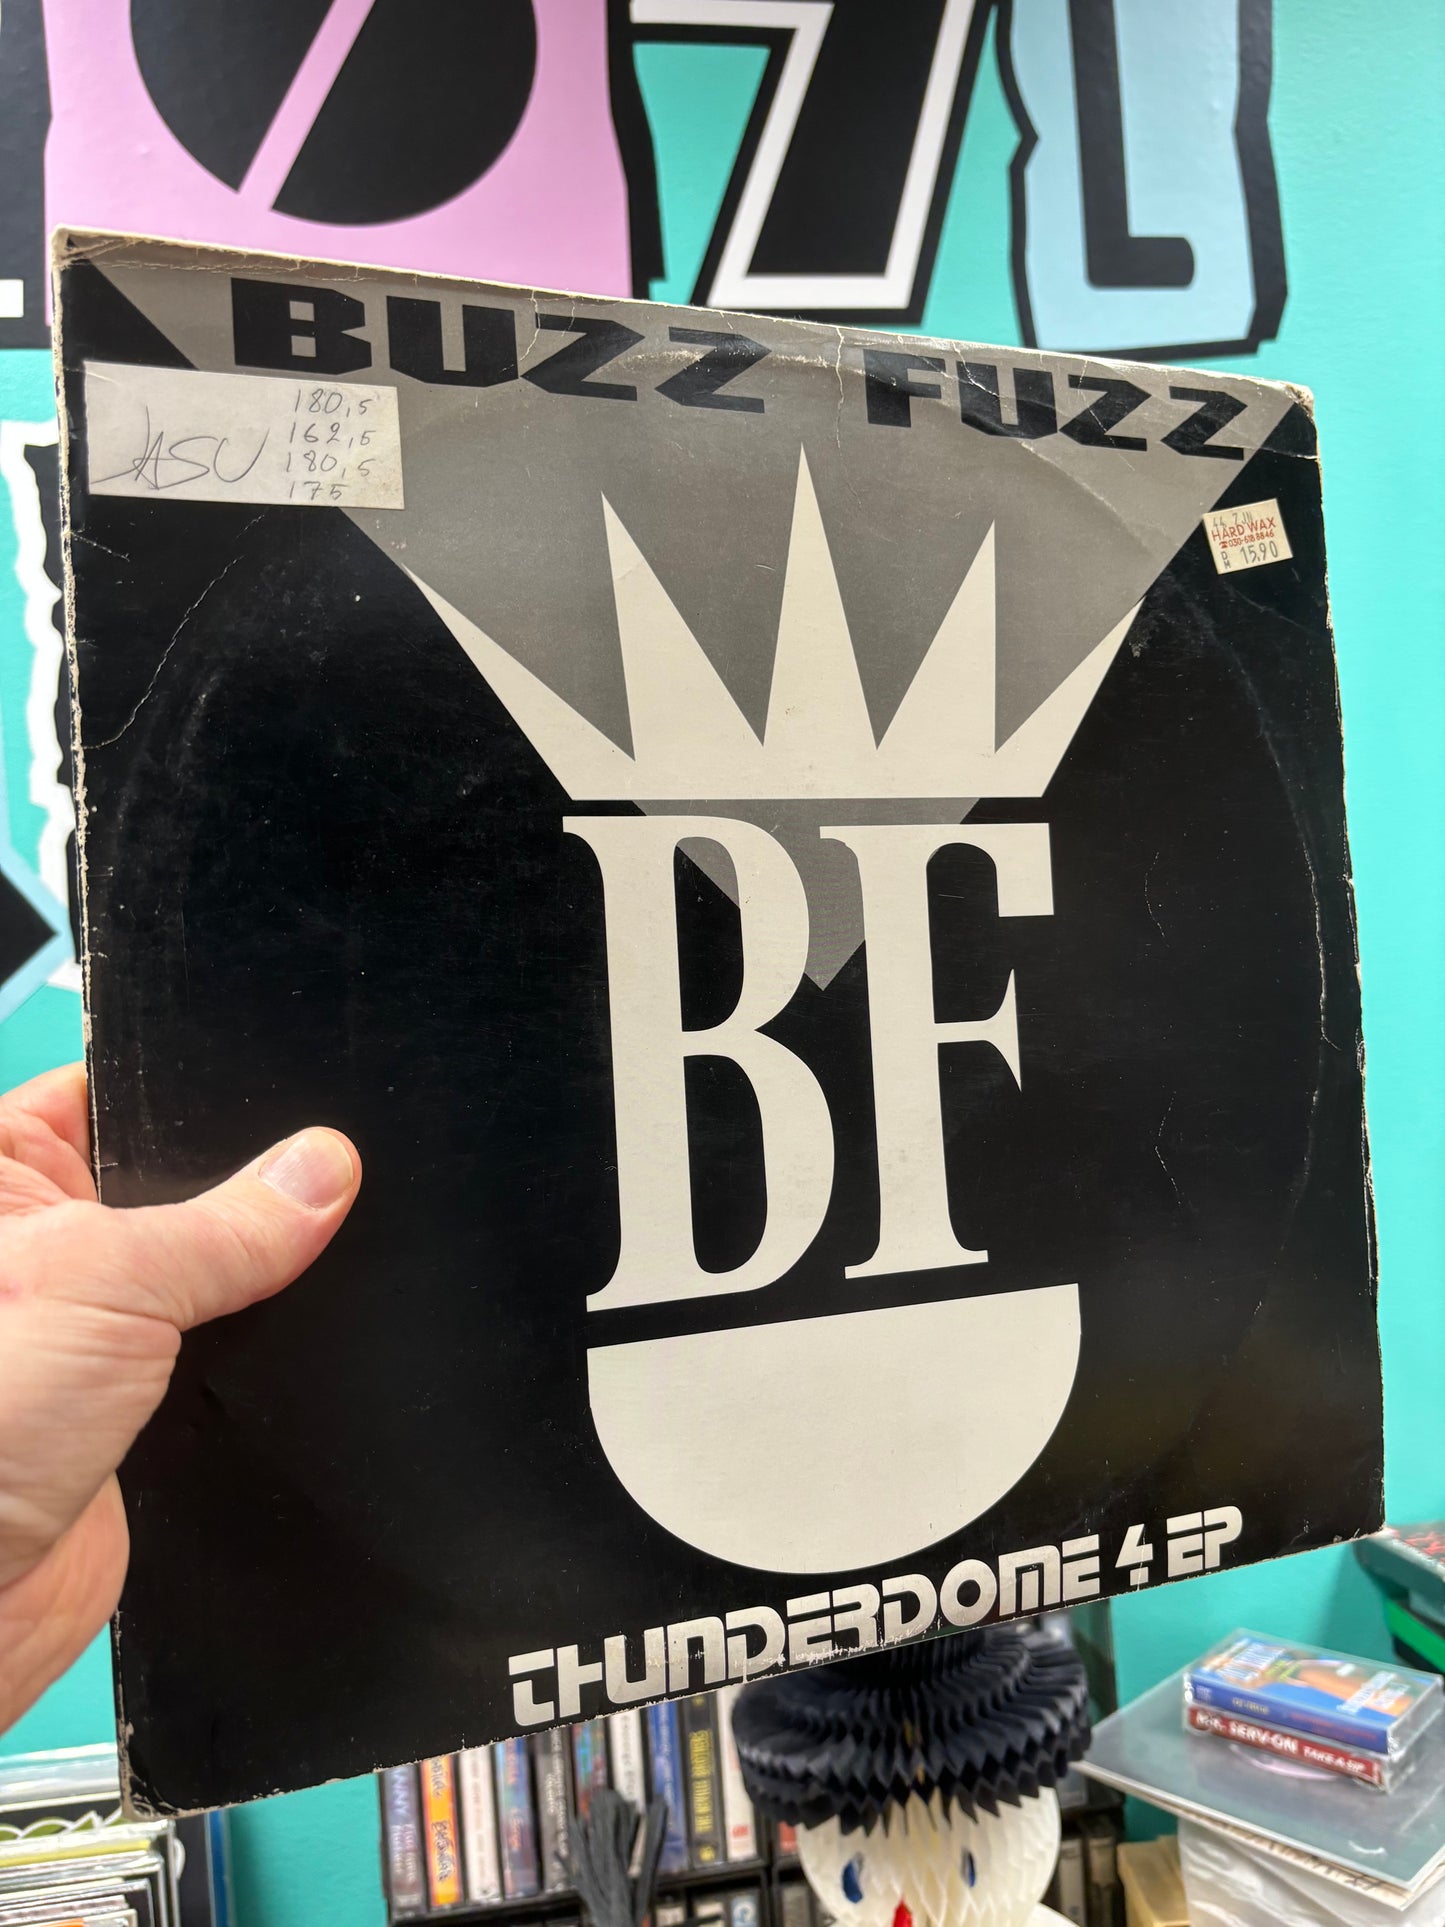 Buzz Fuzz: Thunderdome 4 EP, 12inch, Only official pressing, Netherlands 1993